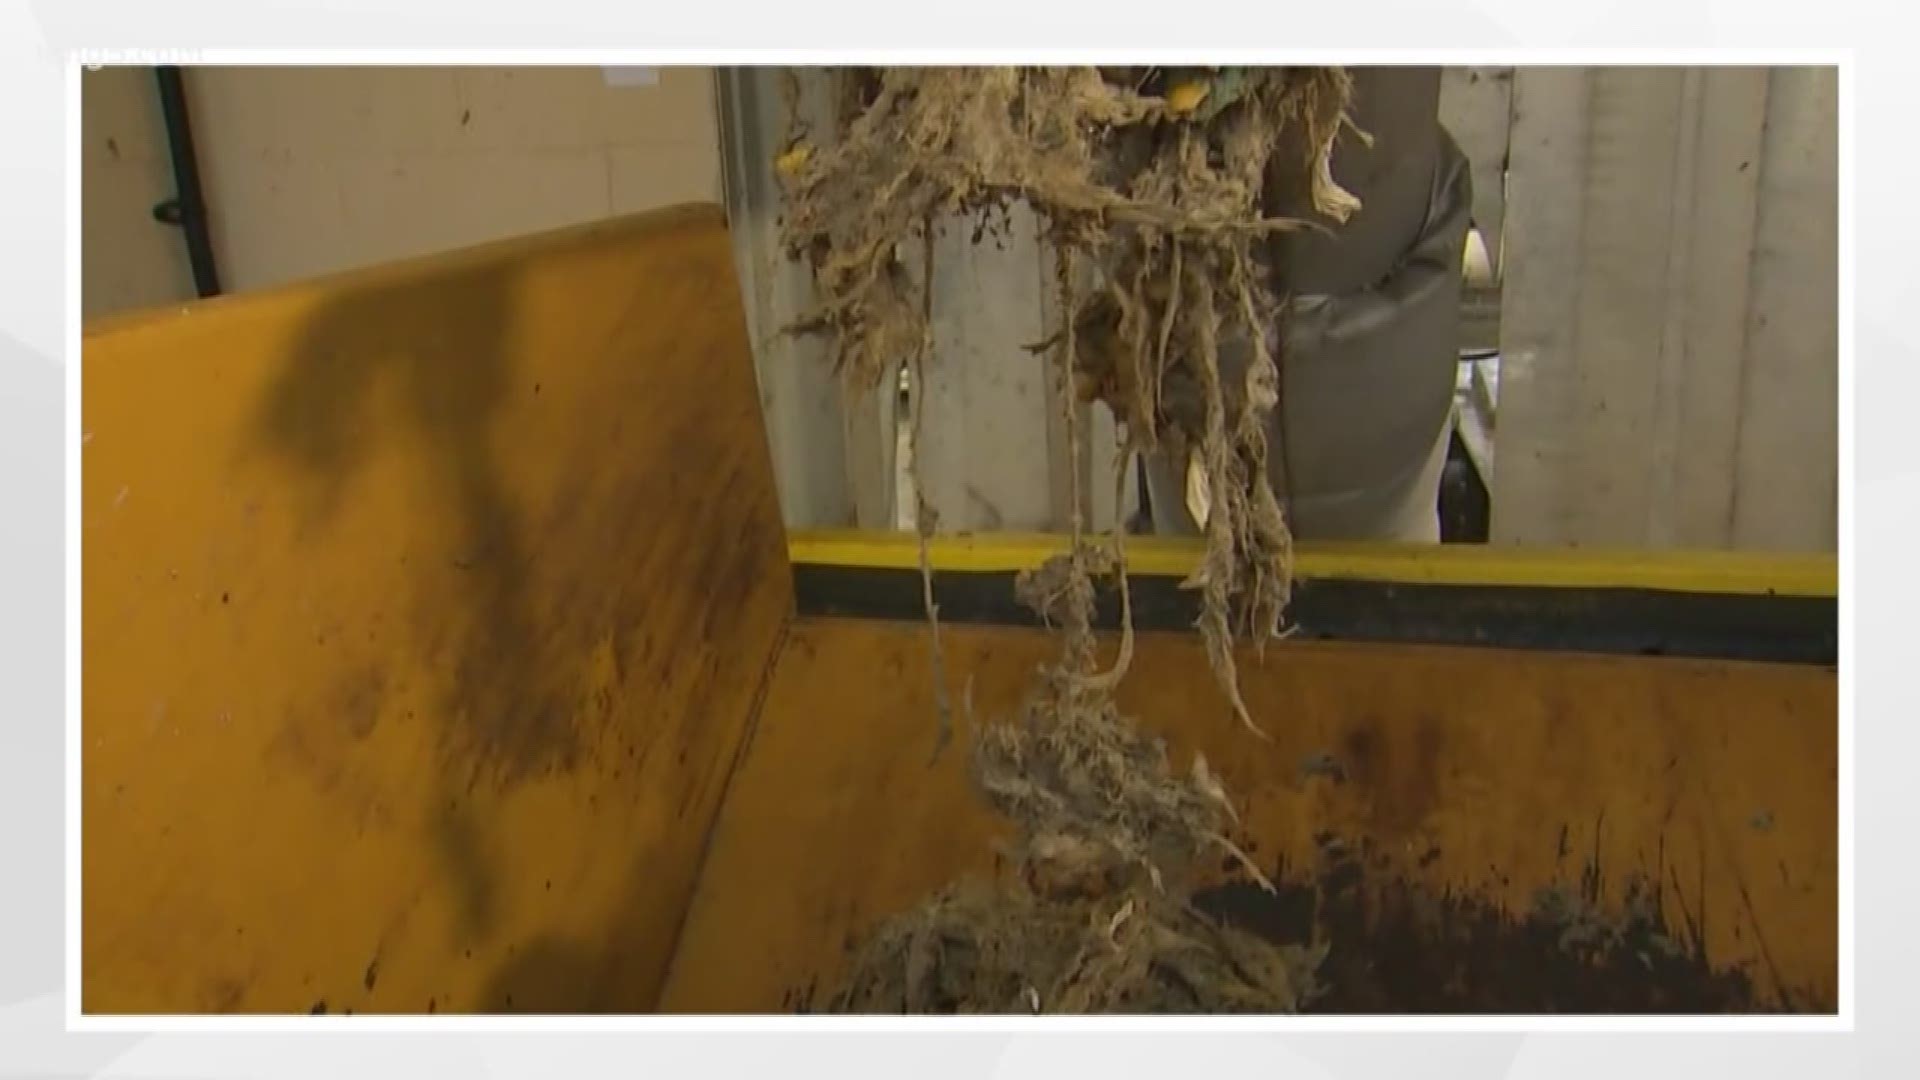 Officials with the City of Tacoma say flushable wipes cause expensive backups in the city's pipes, to the tune of $100k a year. KING 5's Kaci Aitchison has the details.